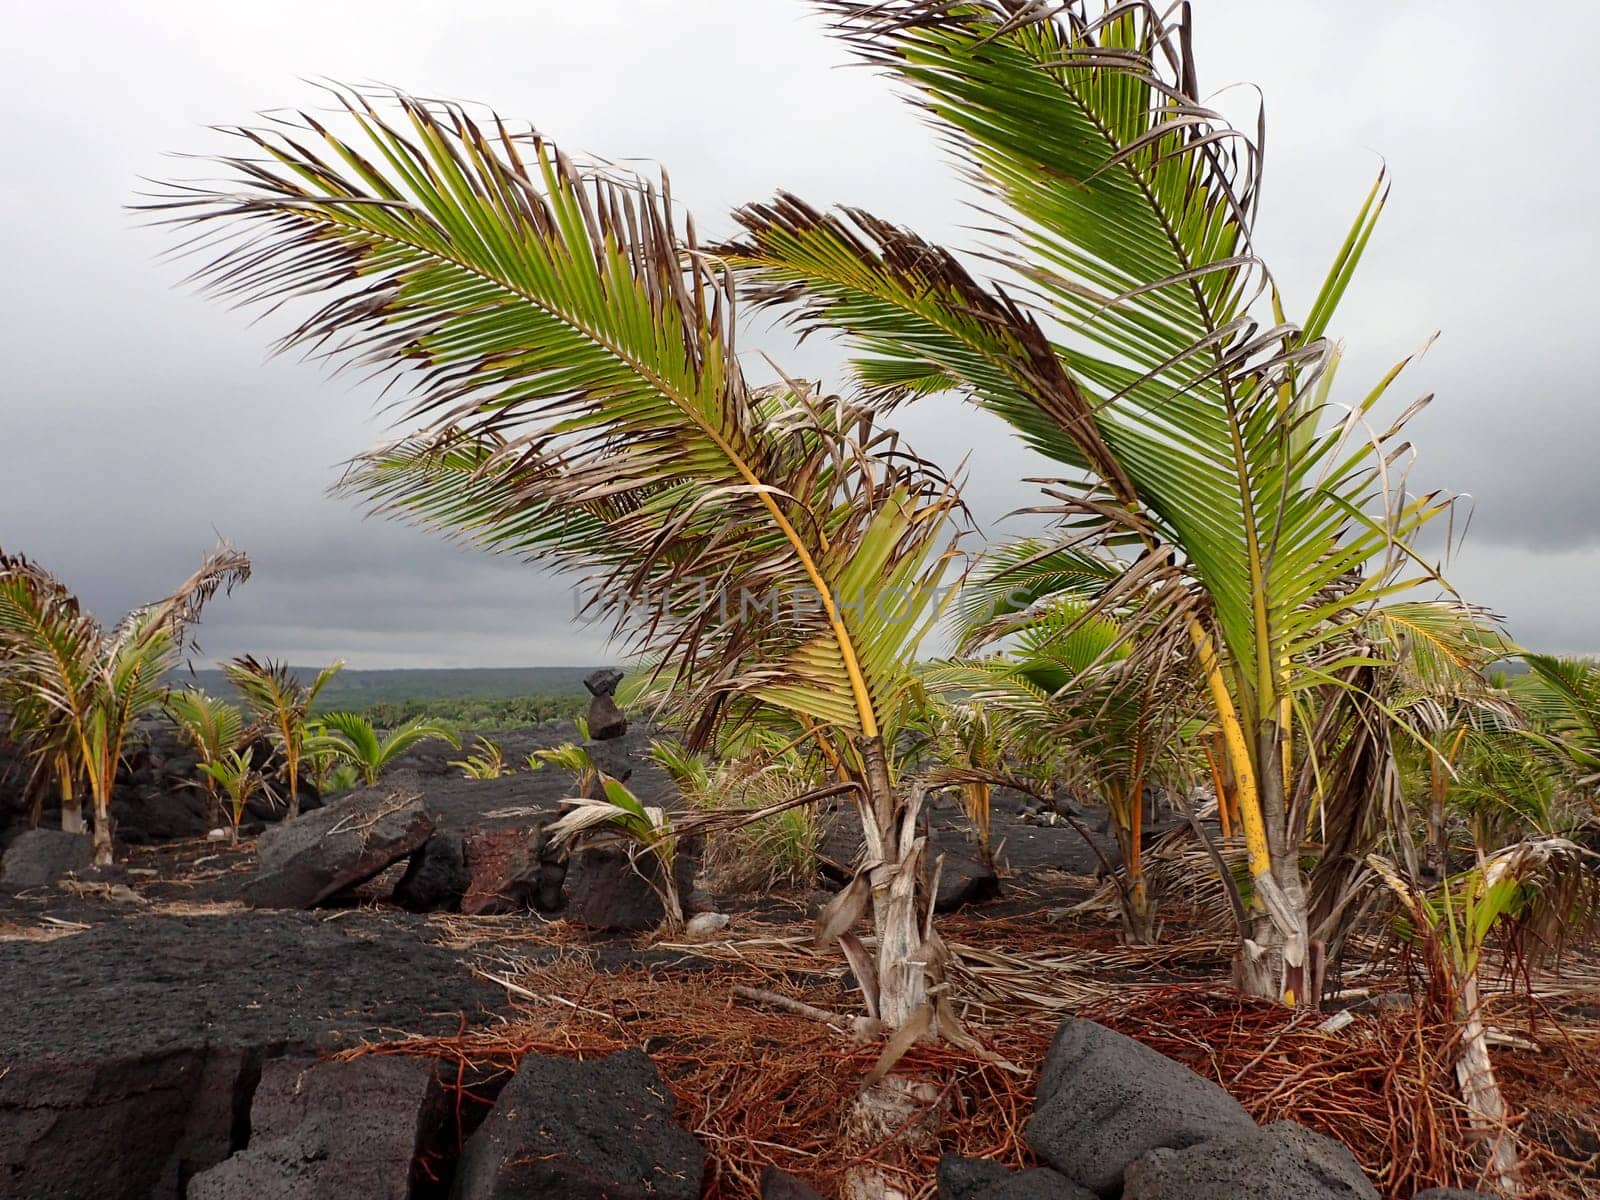 Coconut Palm Trees Growing on Lava Rocks in Kalapana, Hawaii by EricGBVD